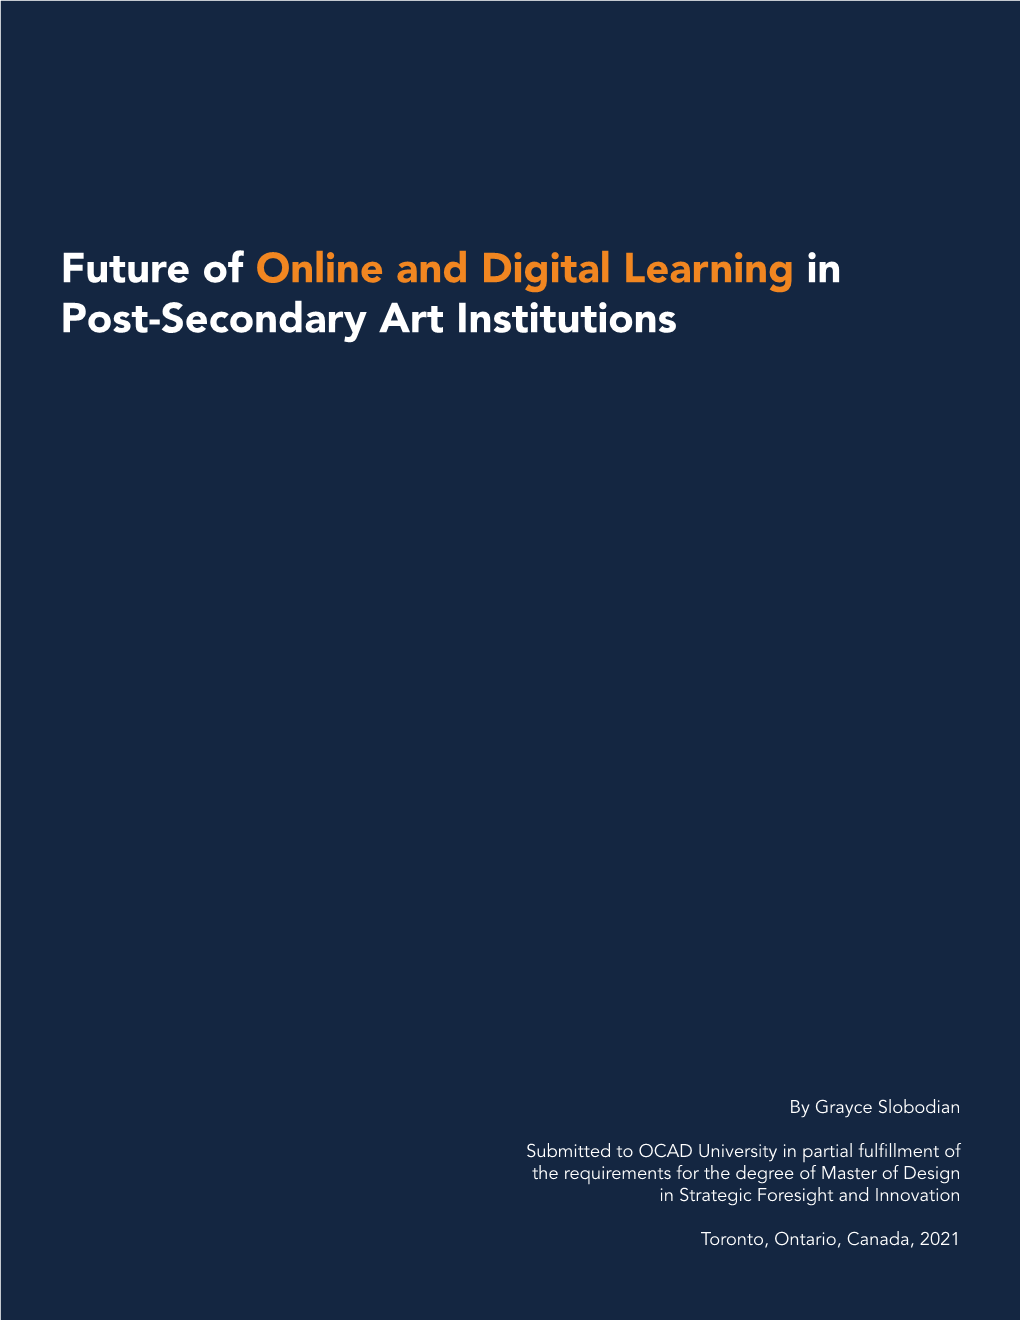 Future of Online and Digital Learning in Post-Secondary Art Institutions